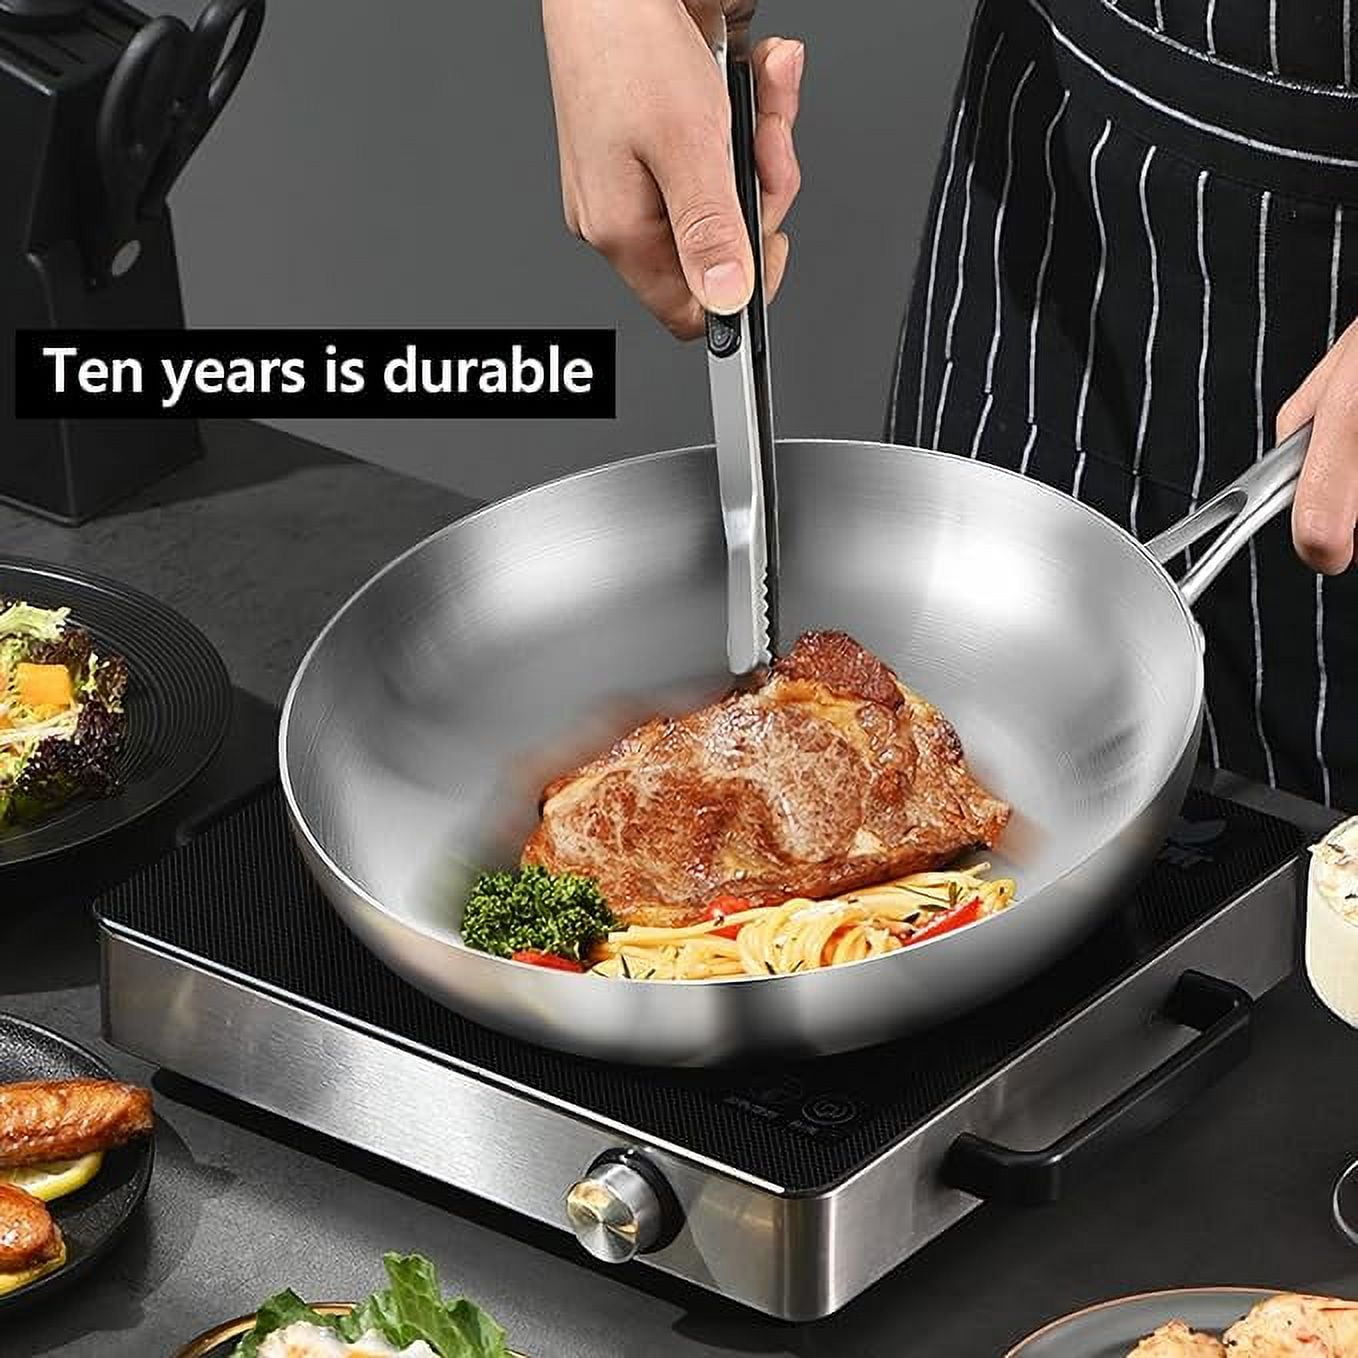 LOLYKITCH 12 inch Tri-Ply Stainless Steel Frying Pan,Skillet,Induction Pan,Dishwasher and Oven Safe.(Removable Handle)